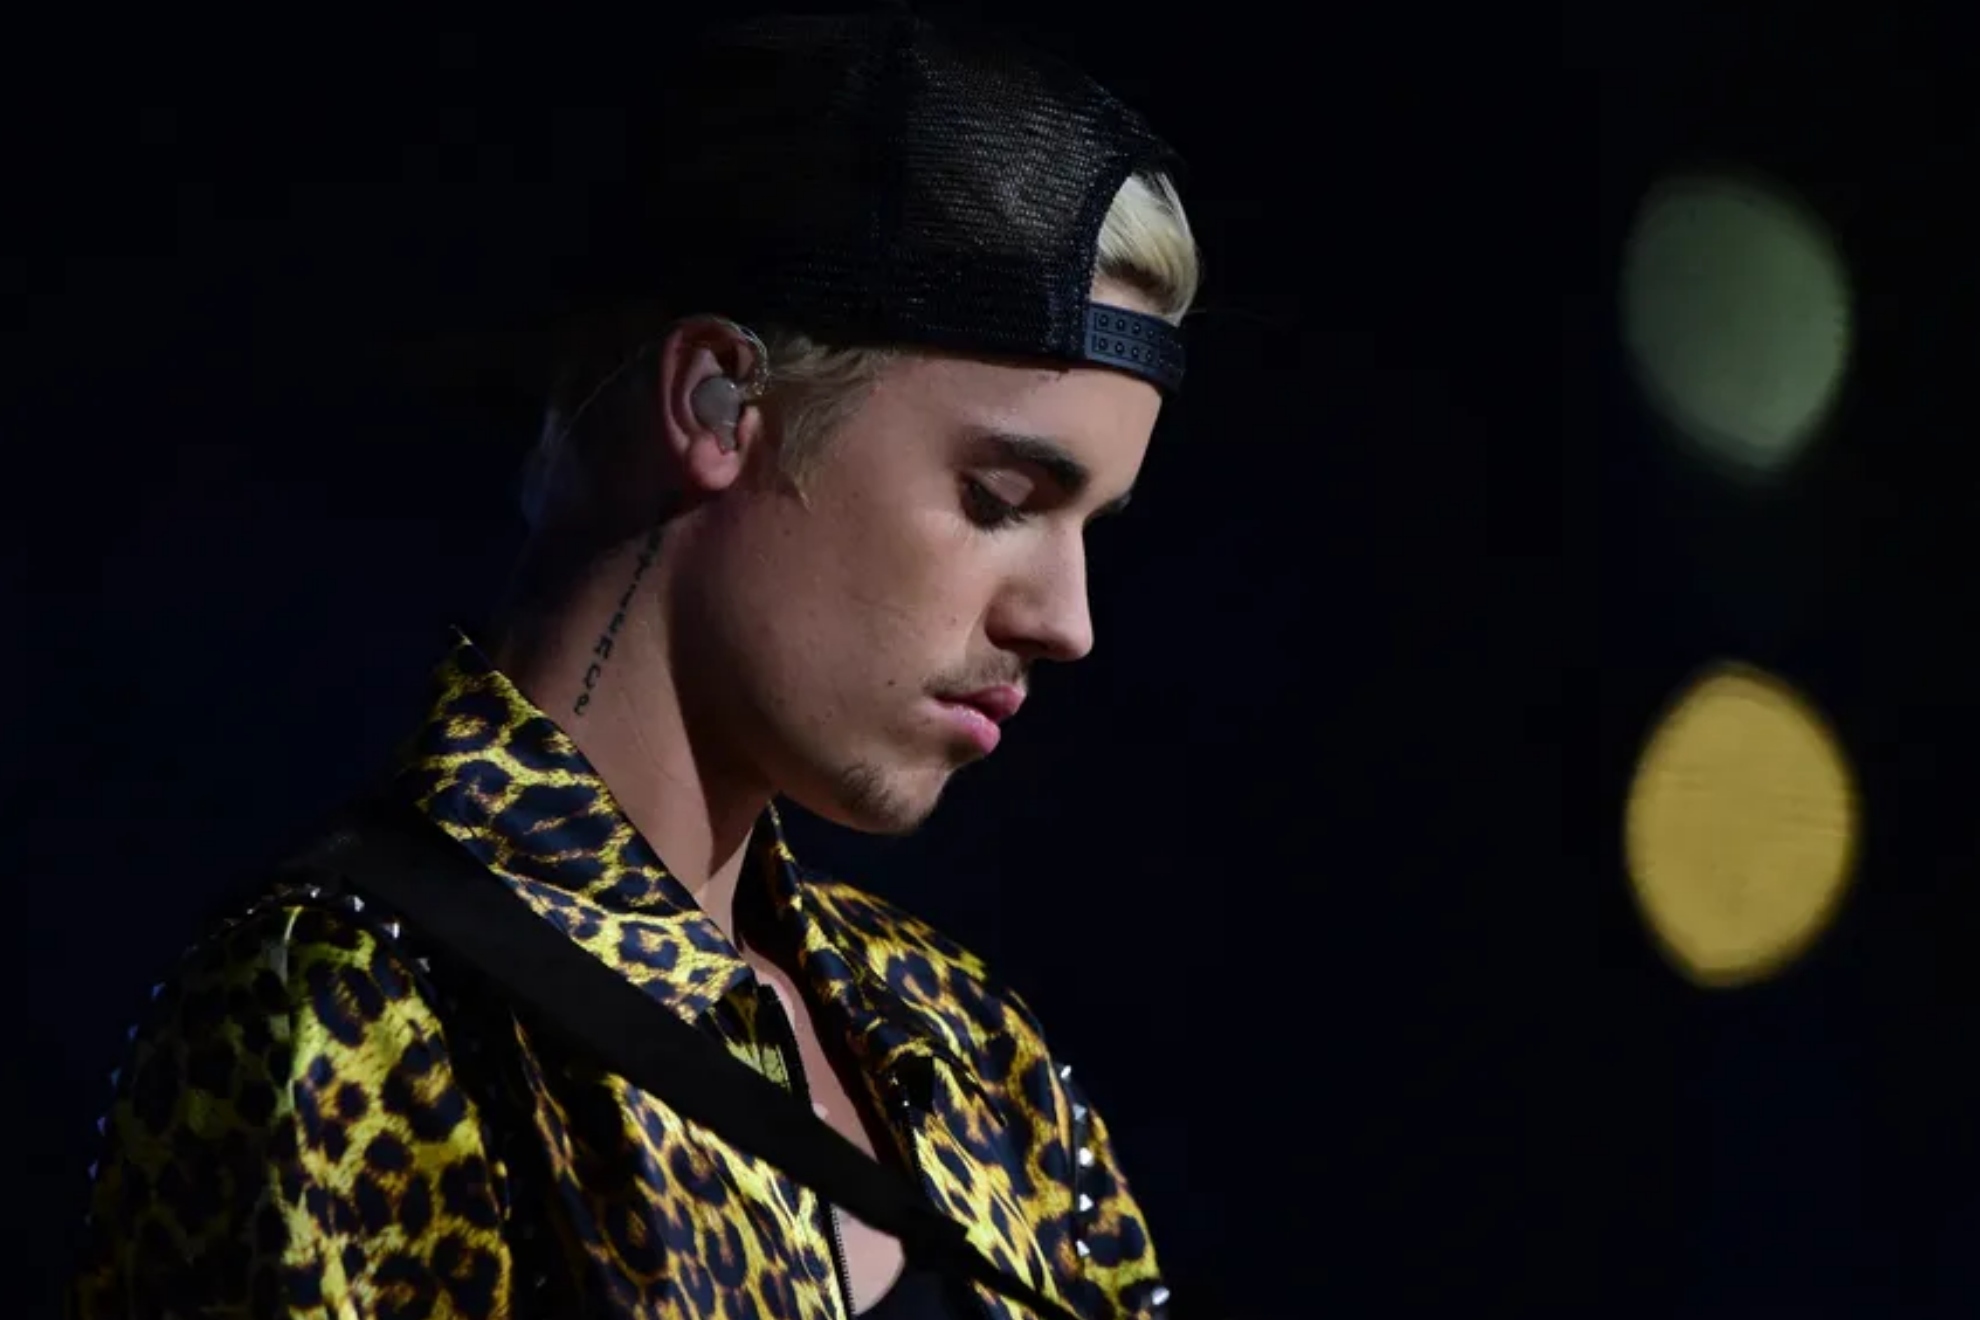 Justin Bieber sells his music catalogue for a staggering 200 million dollars